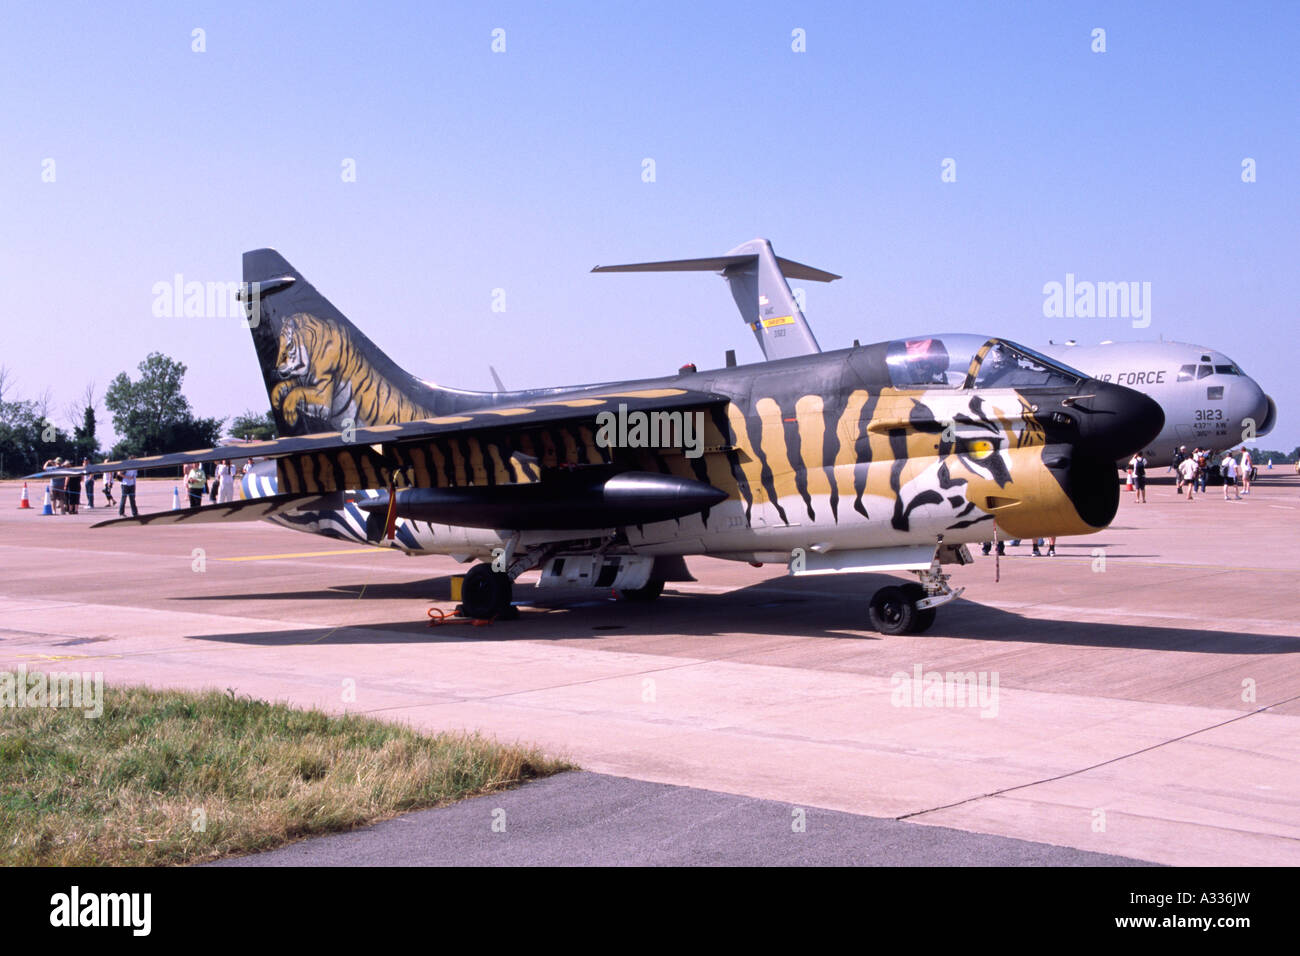 Vought A-7E Corsair, decorated in Tiger Stripes colour scheme, operated by the Hellenic Air Force. Stock Photo